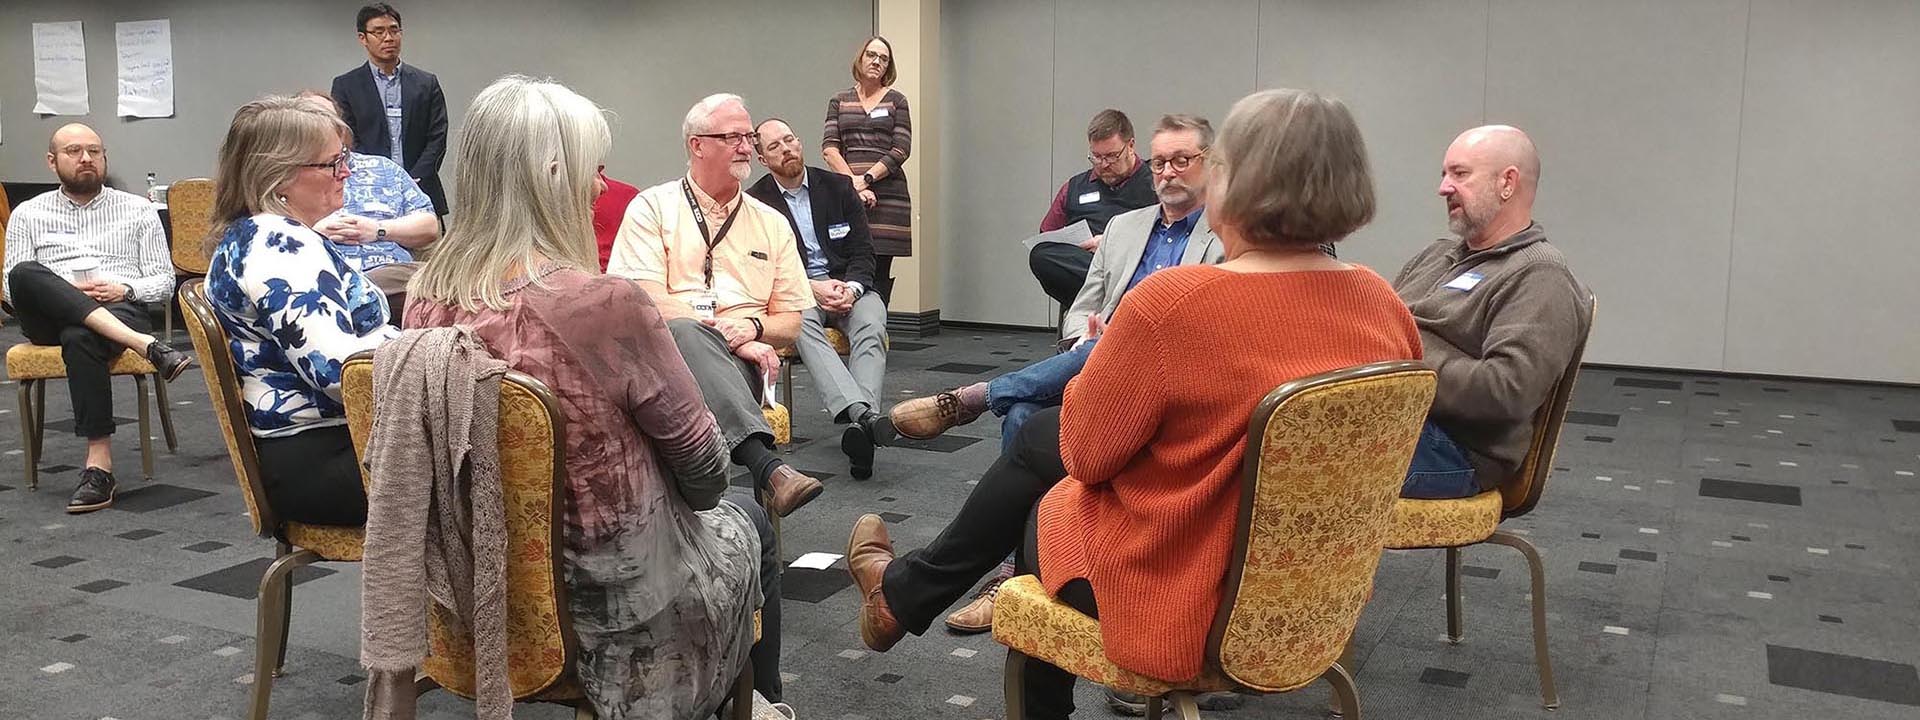 Douglas Hume at a Cooperative Center for Study Abroad Workshop, Western Kentucky University, 2019